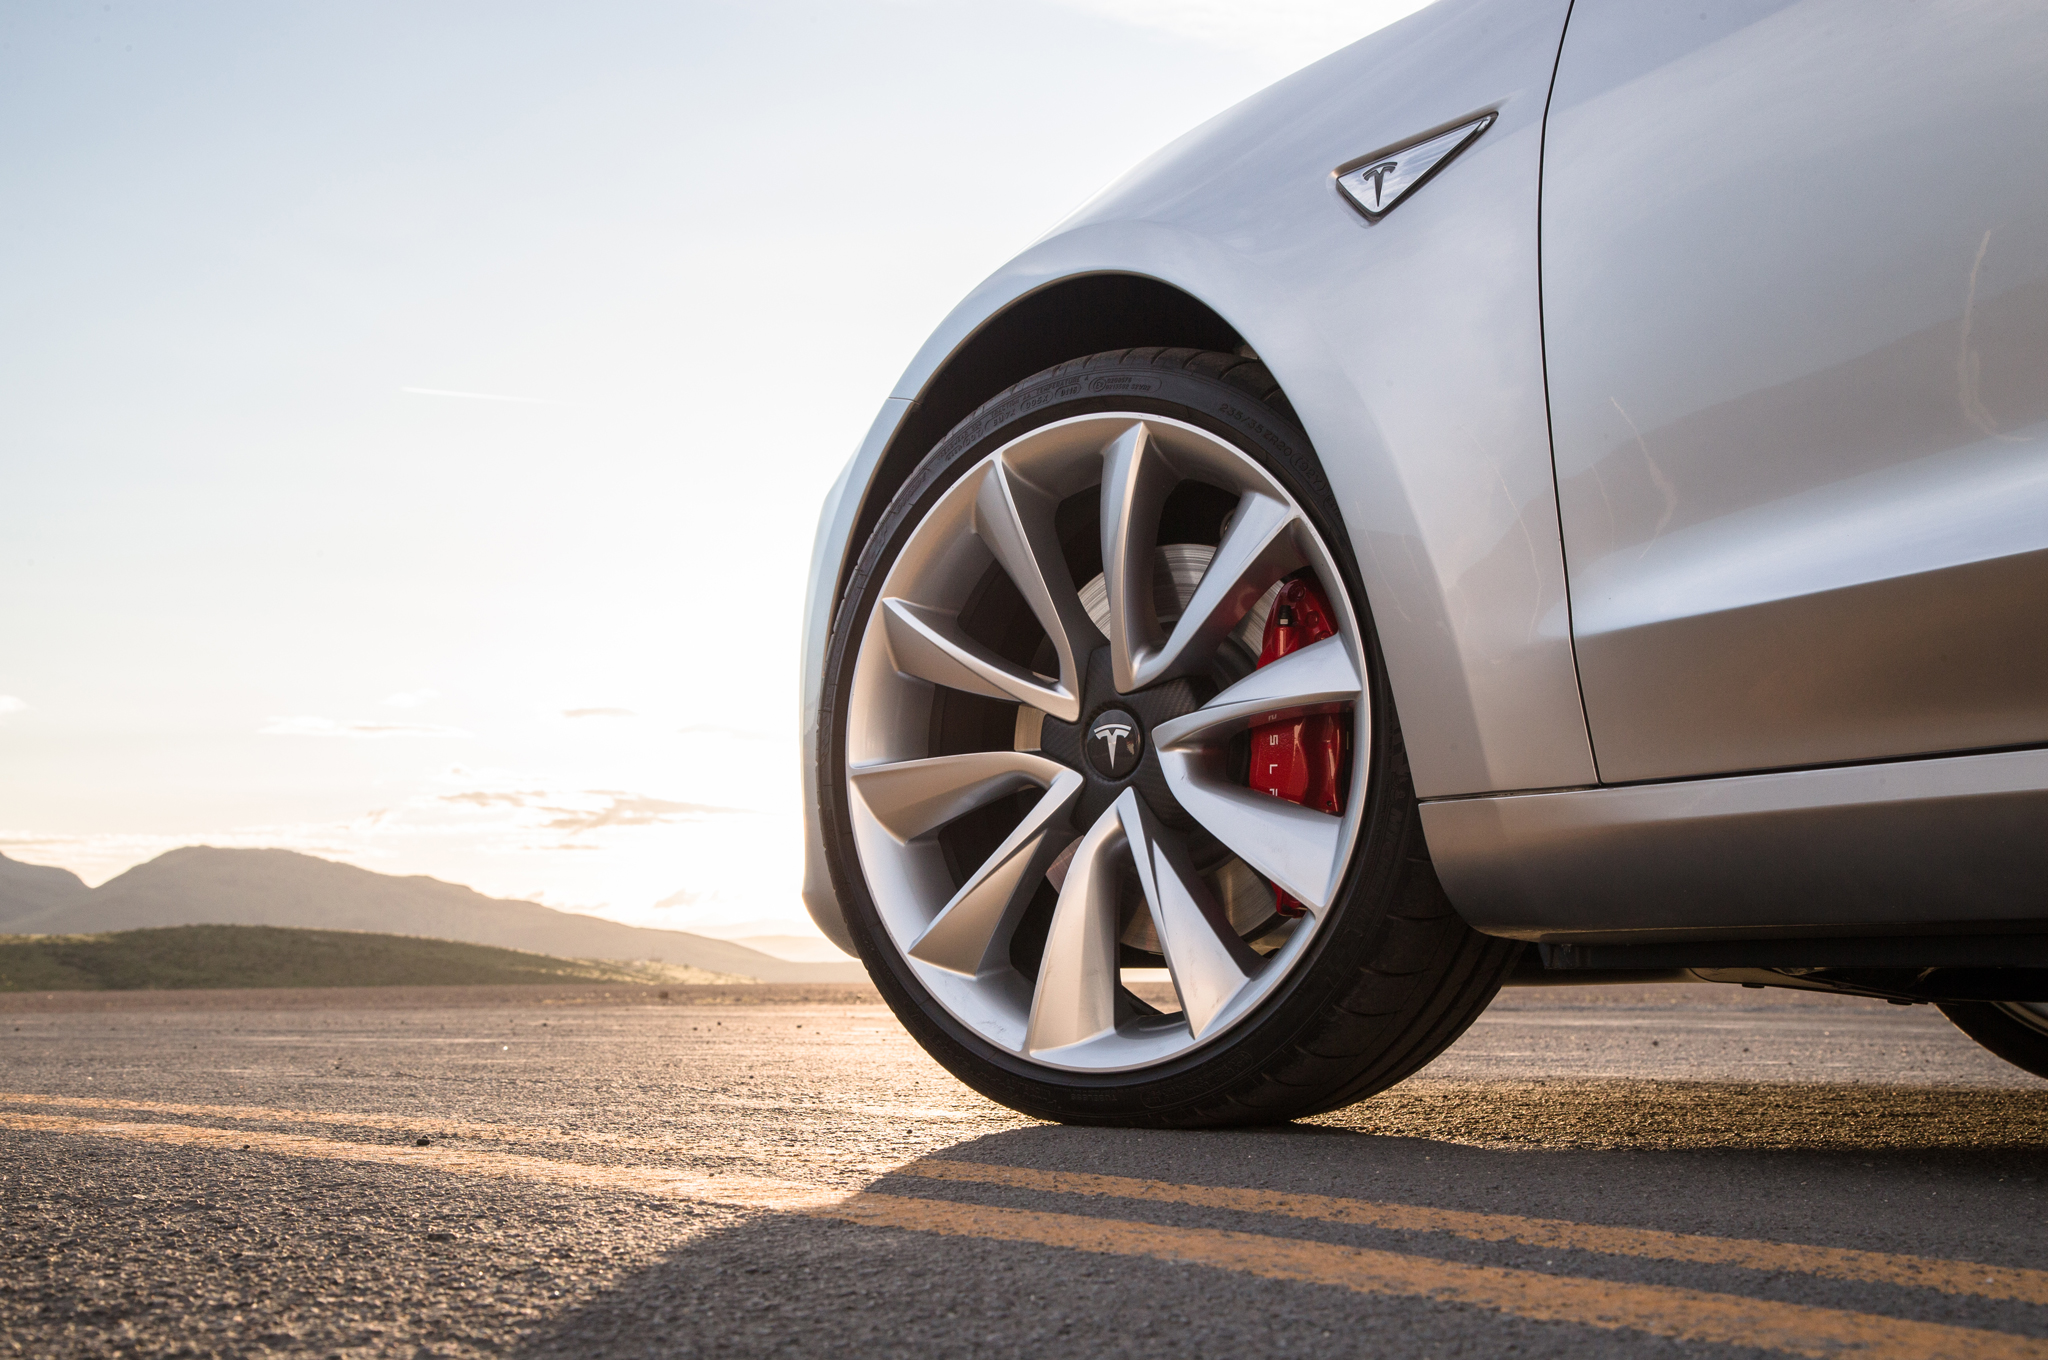 Why are tesla tires so expensive - 3 important tips